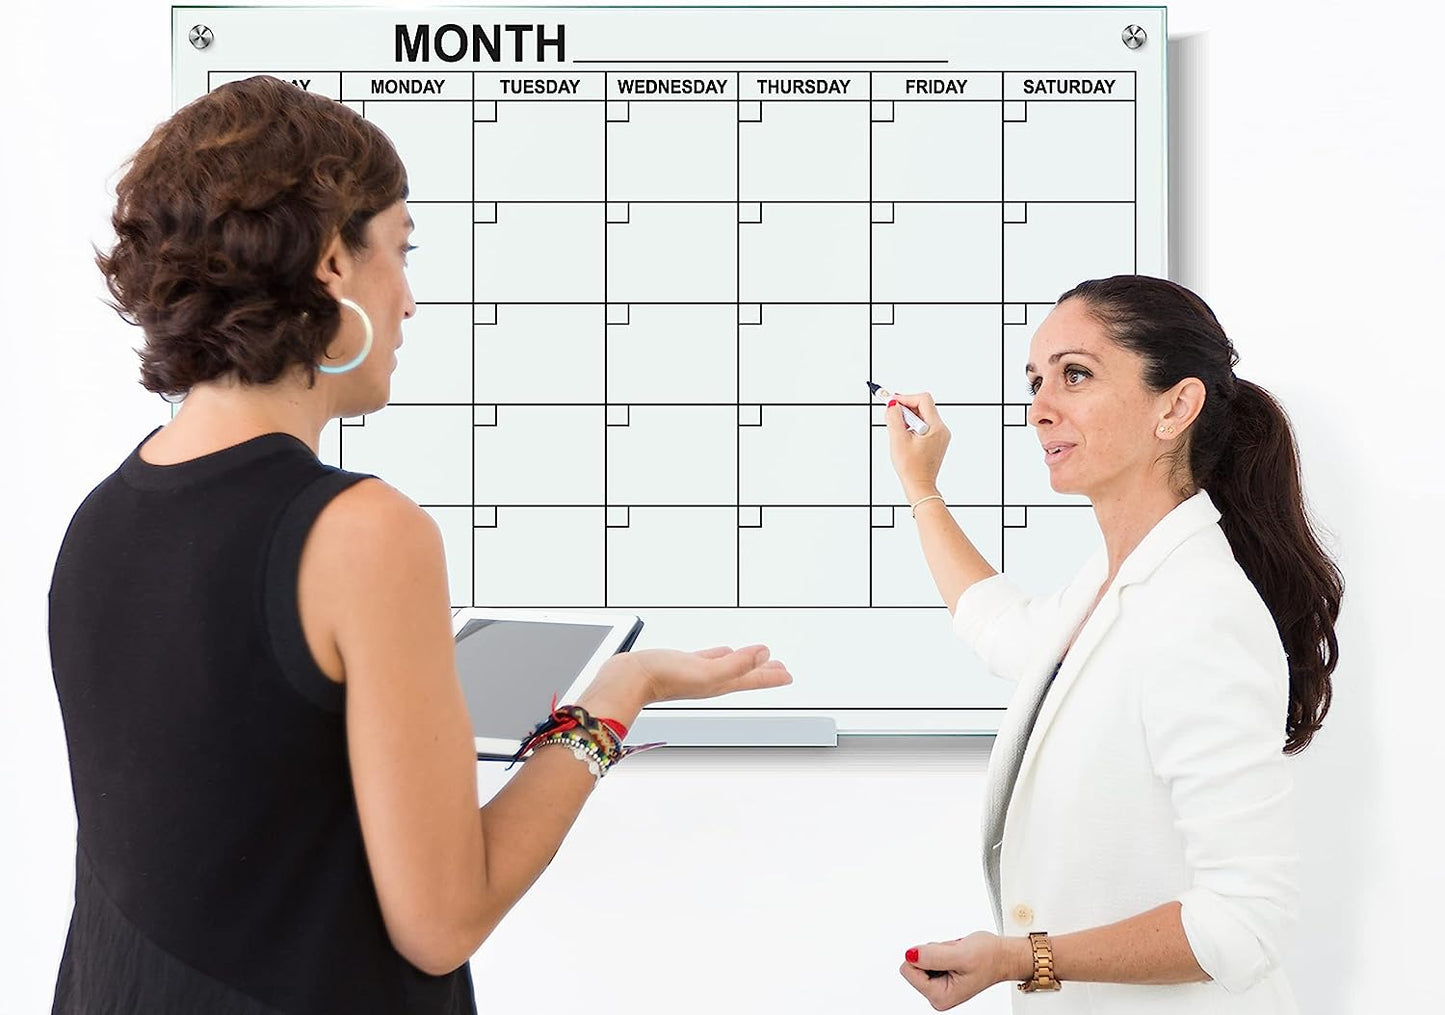 34x46 glass monthly planner whiteboard for offices